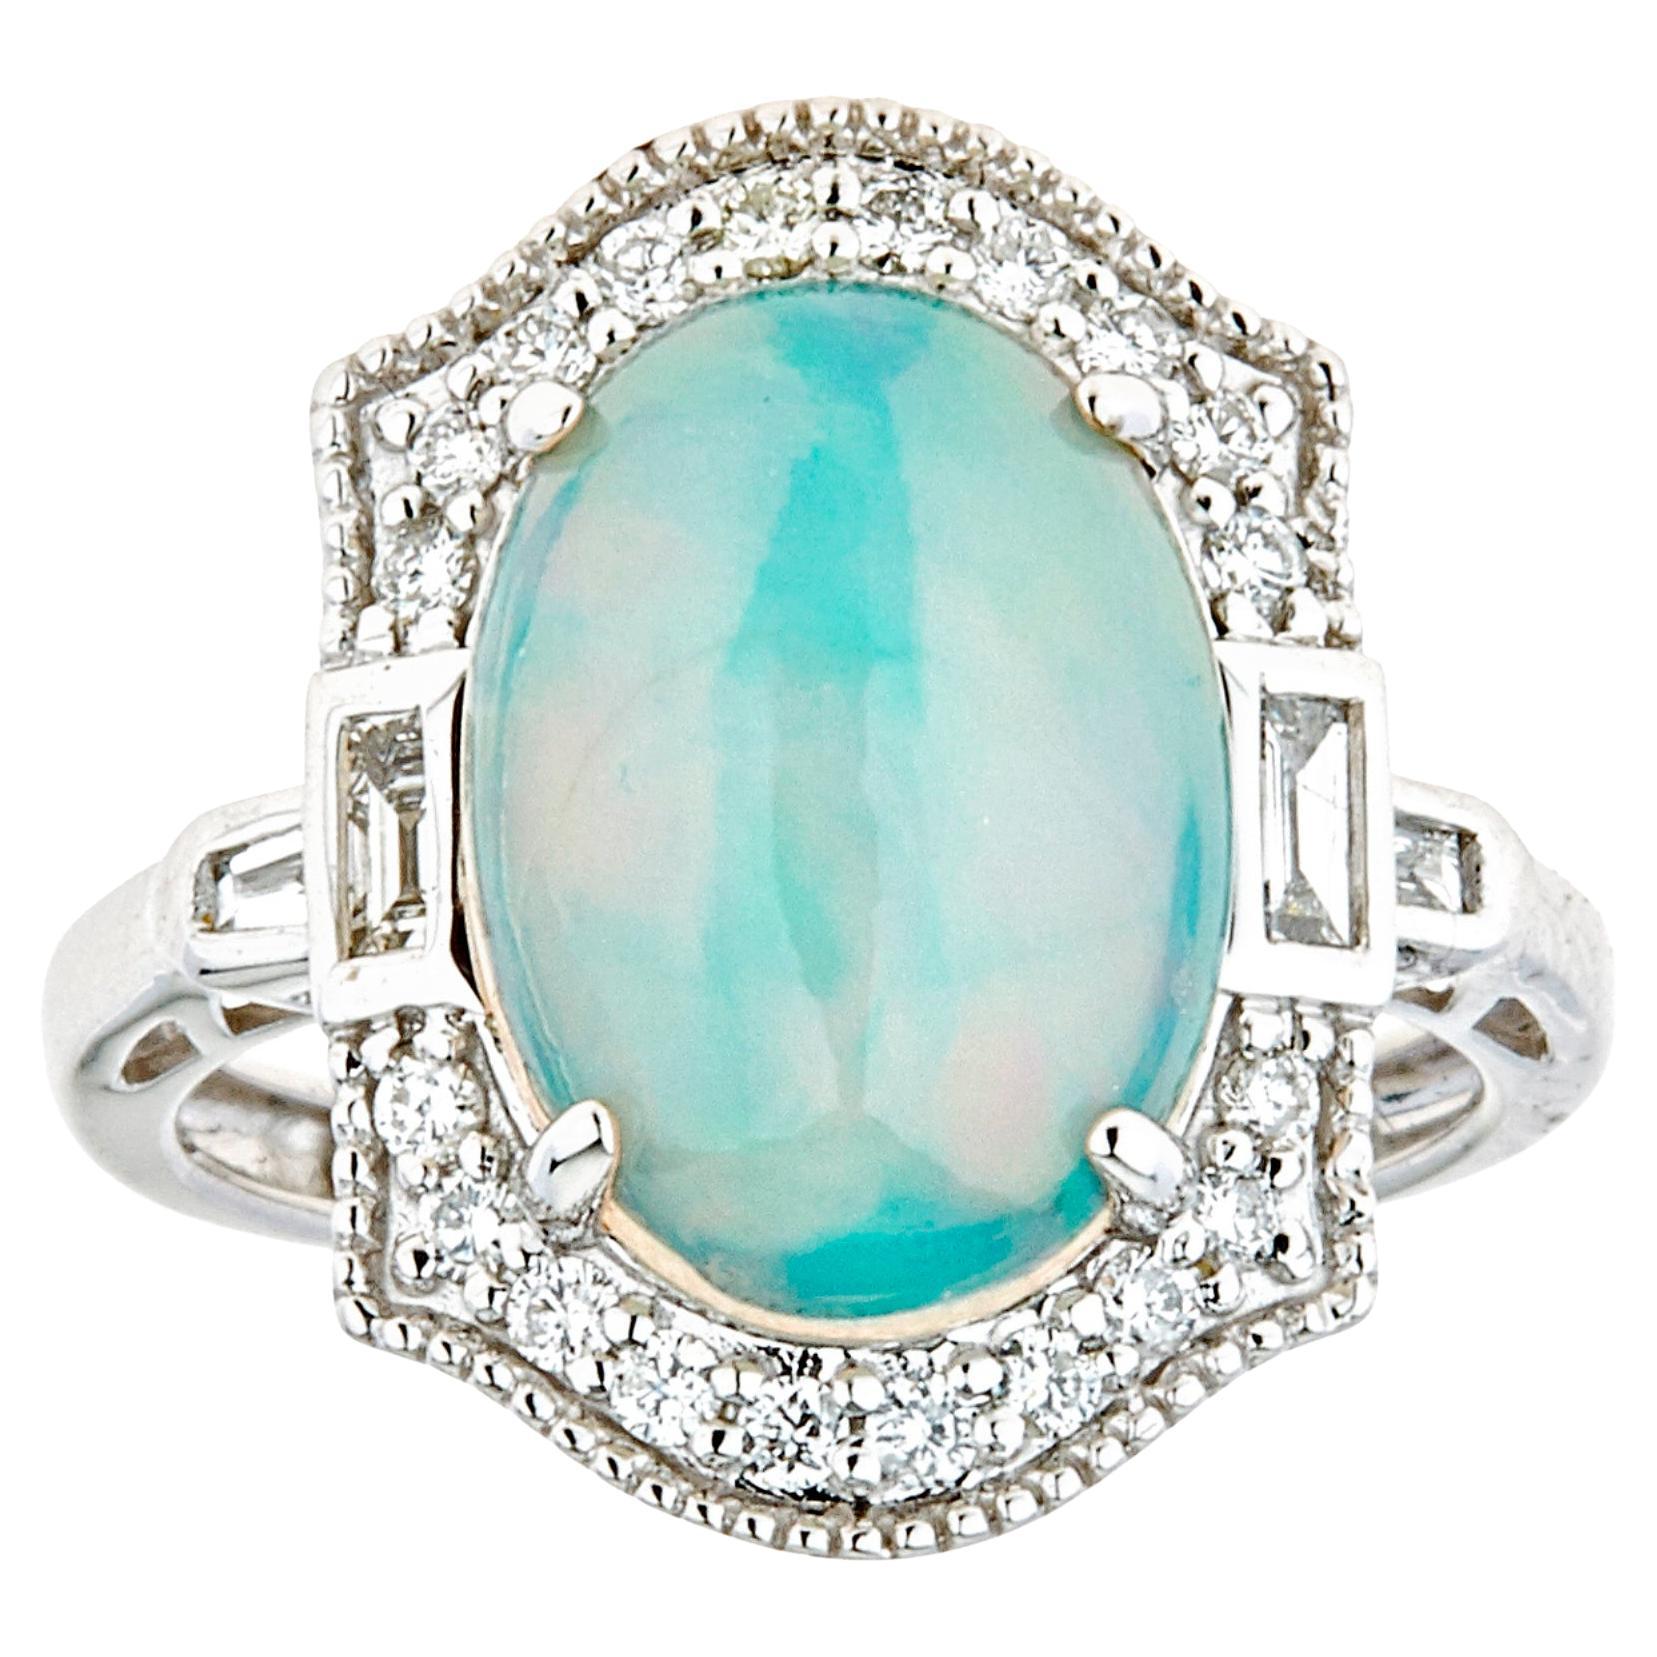 4.49 Carat Ethiopian Opal Oval Cab Diamond Accents 14K White Gold Ring